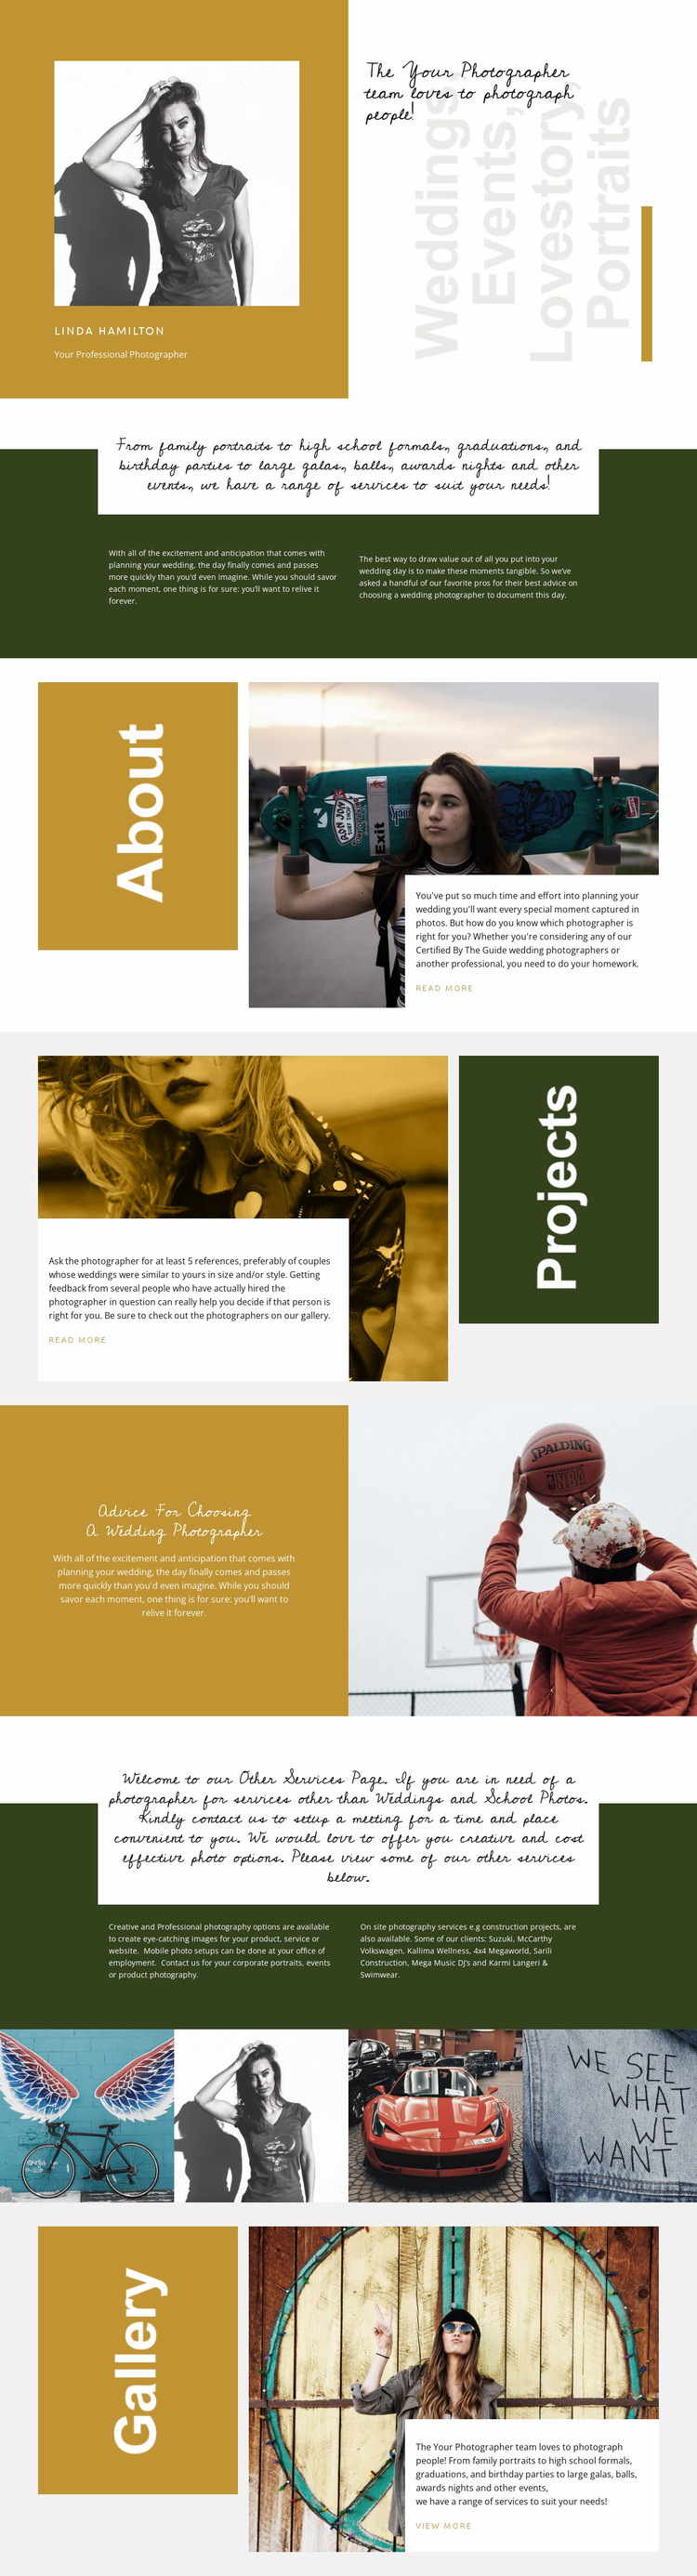 Fashion photography courses Website Builder Templates